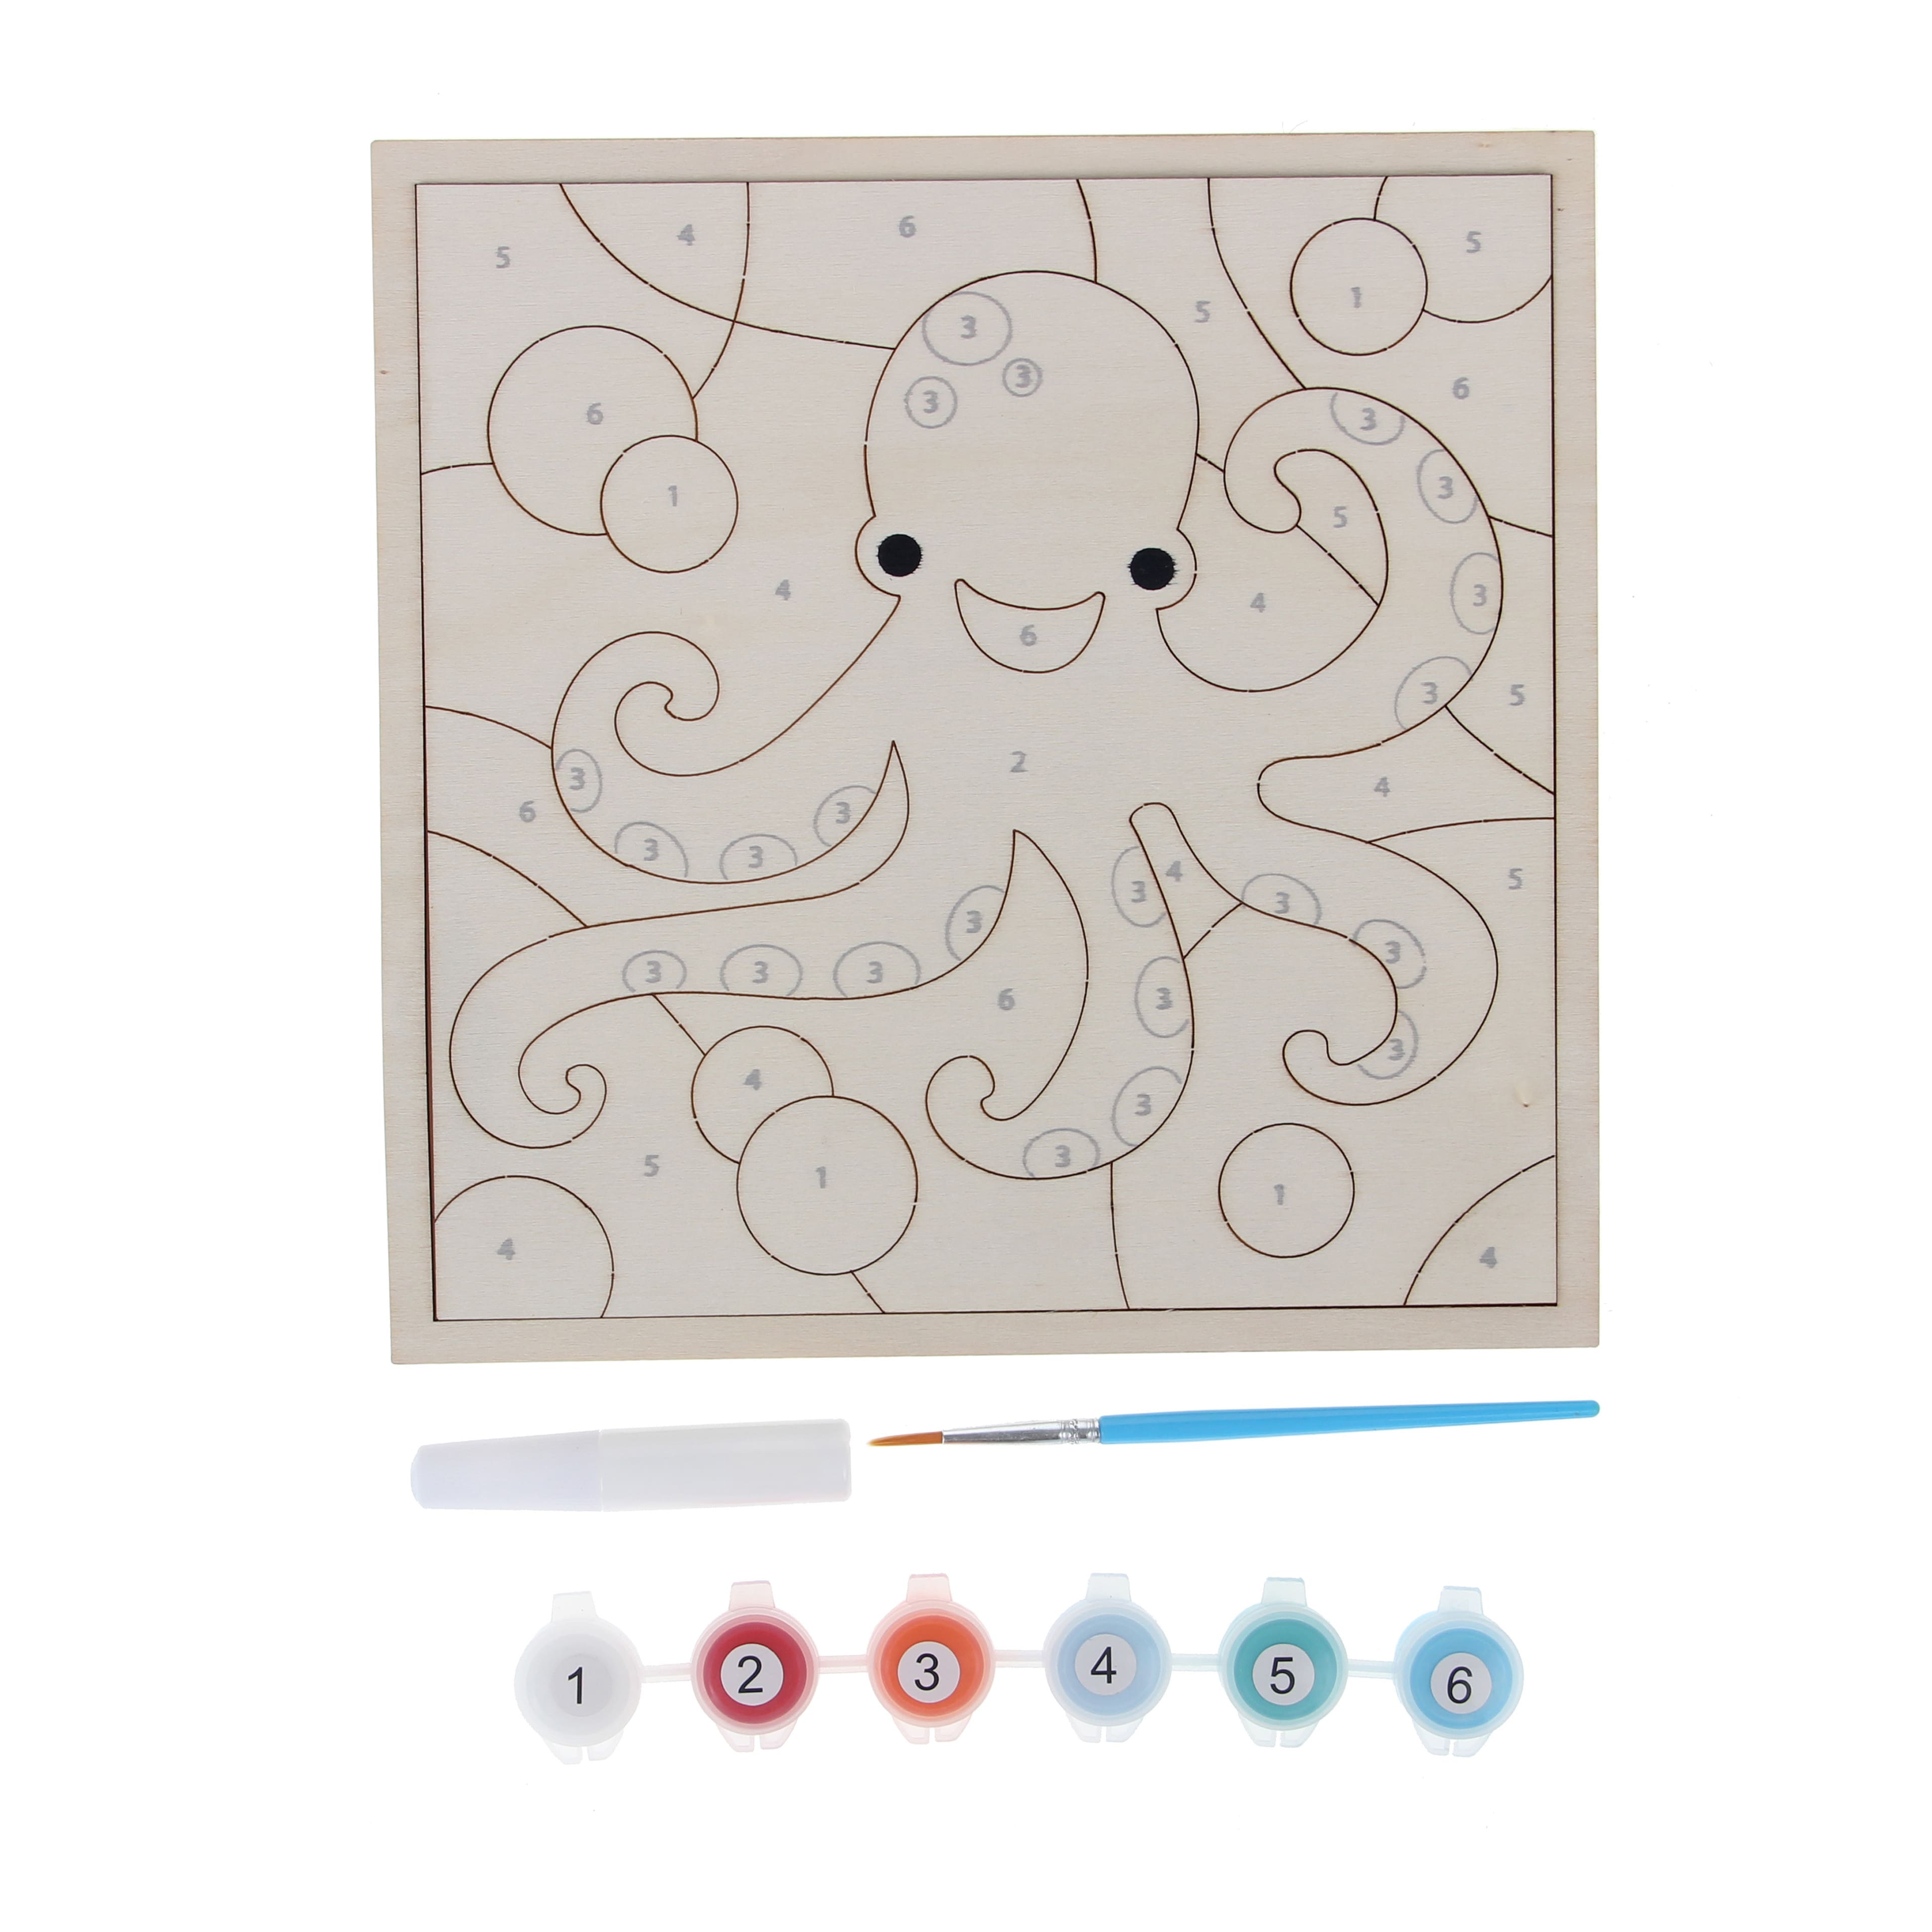 Sea Wood Paint-by-Number Puzzle Kit by Creatology&#x2122;